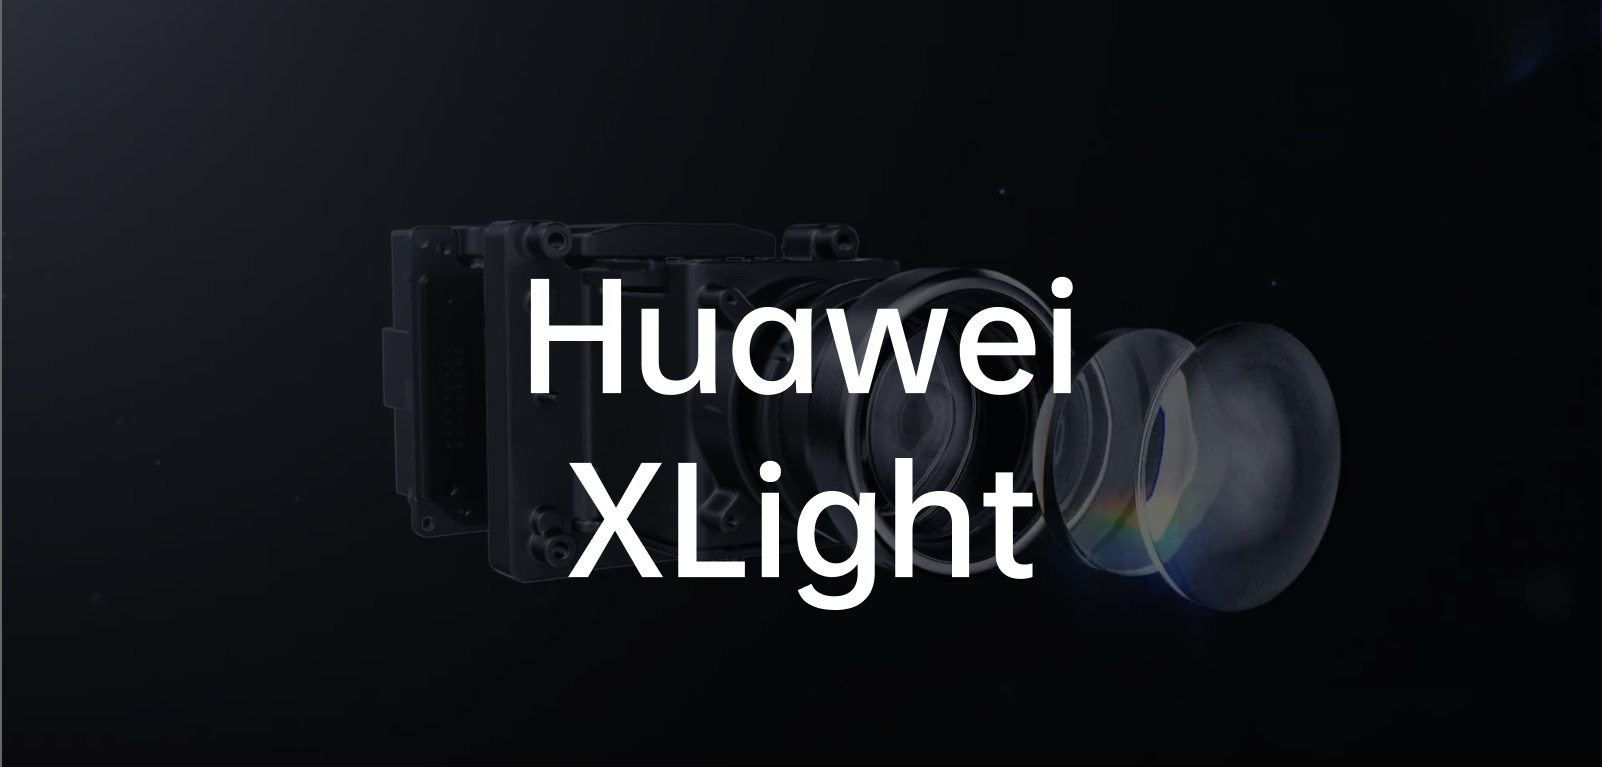 Huawei invites you to watch movies with your car lights.